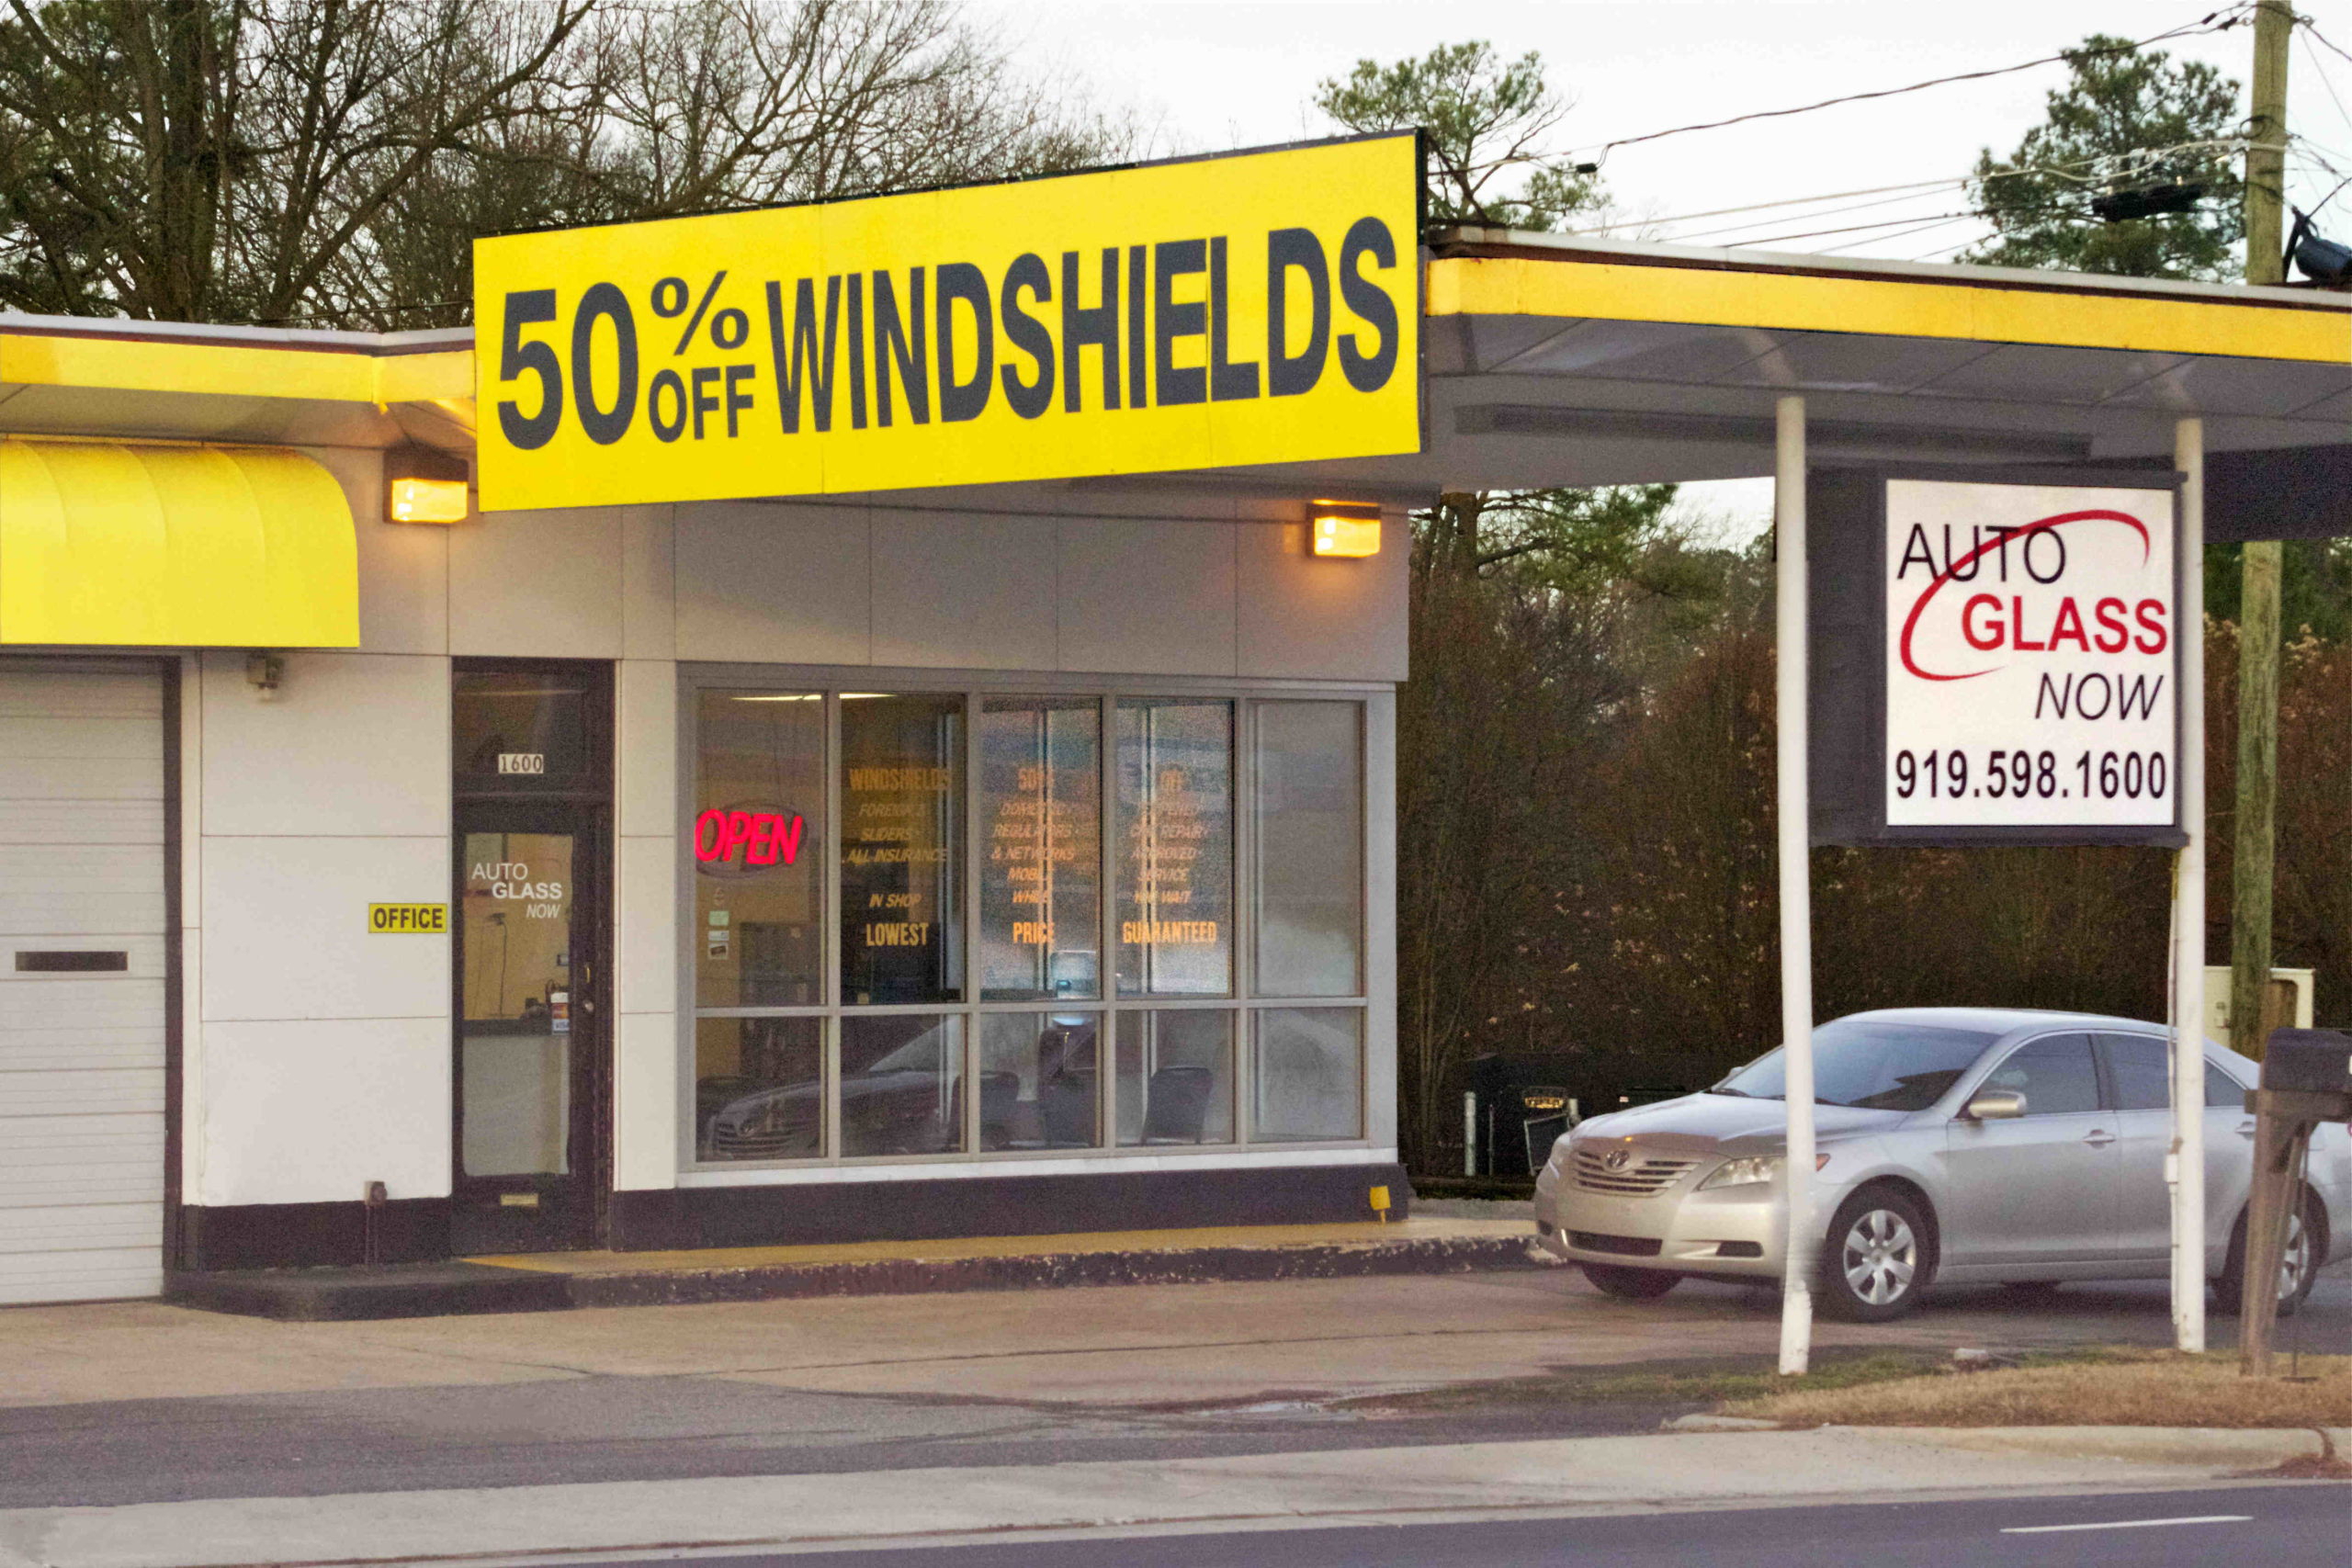 How much is a new windshield?